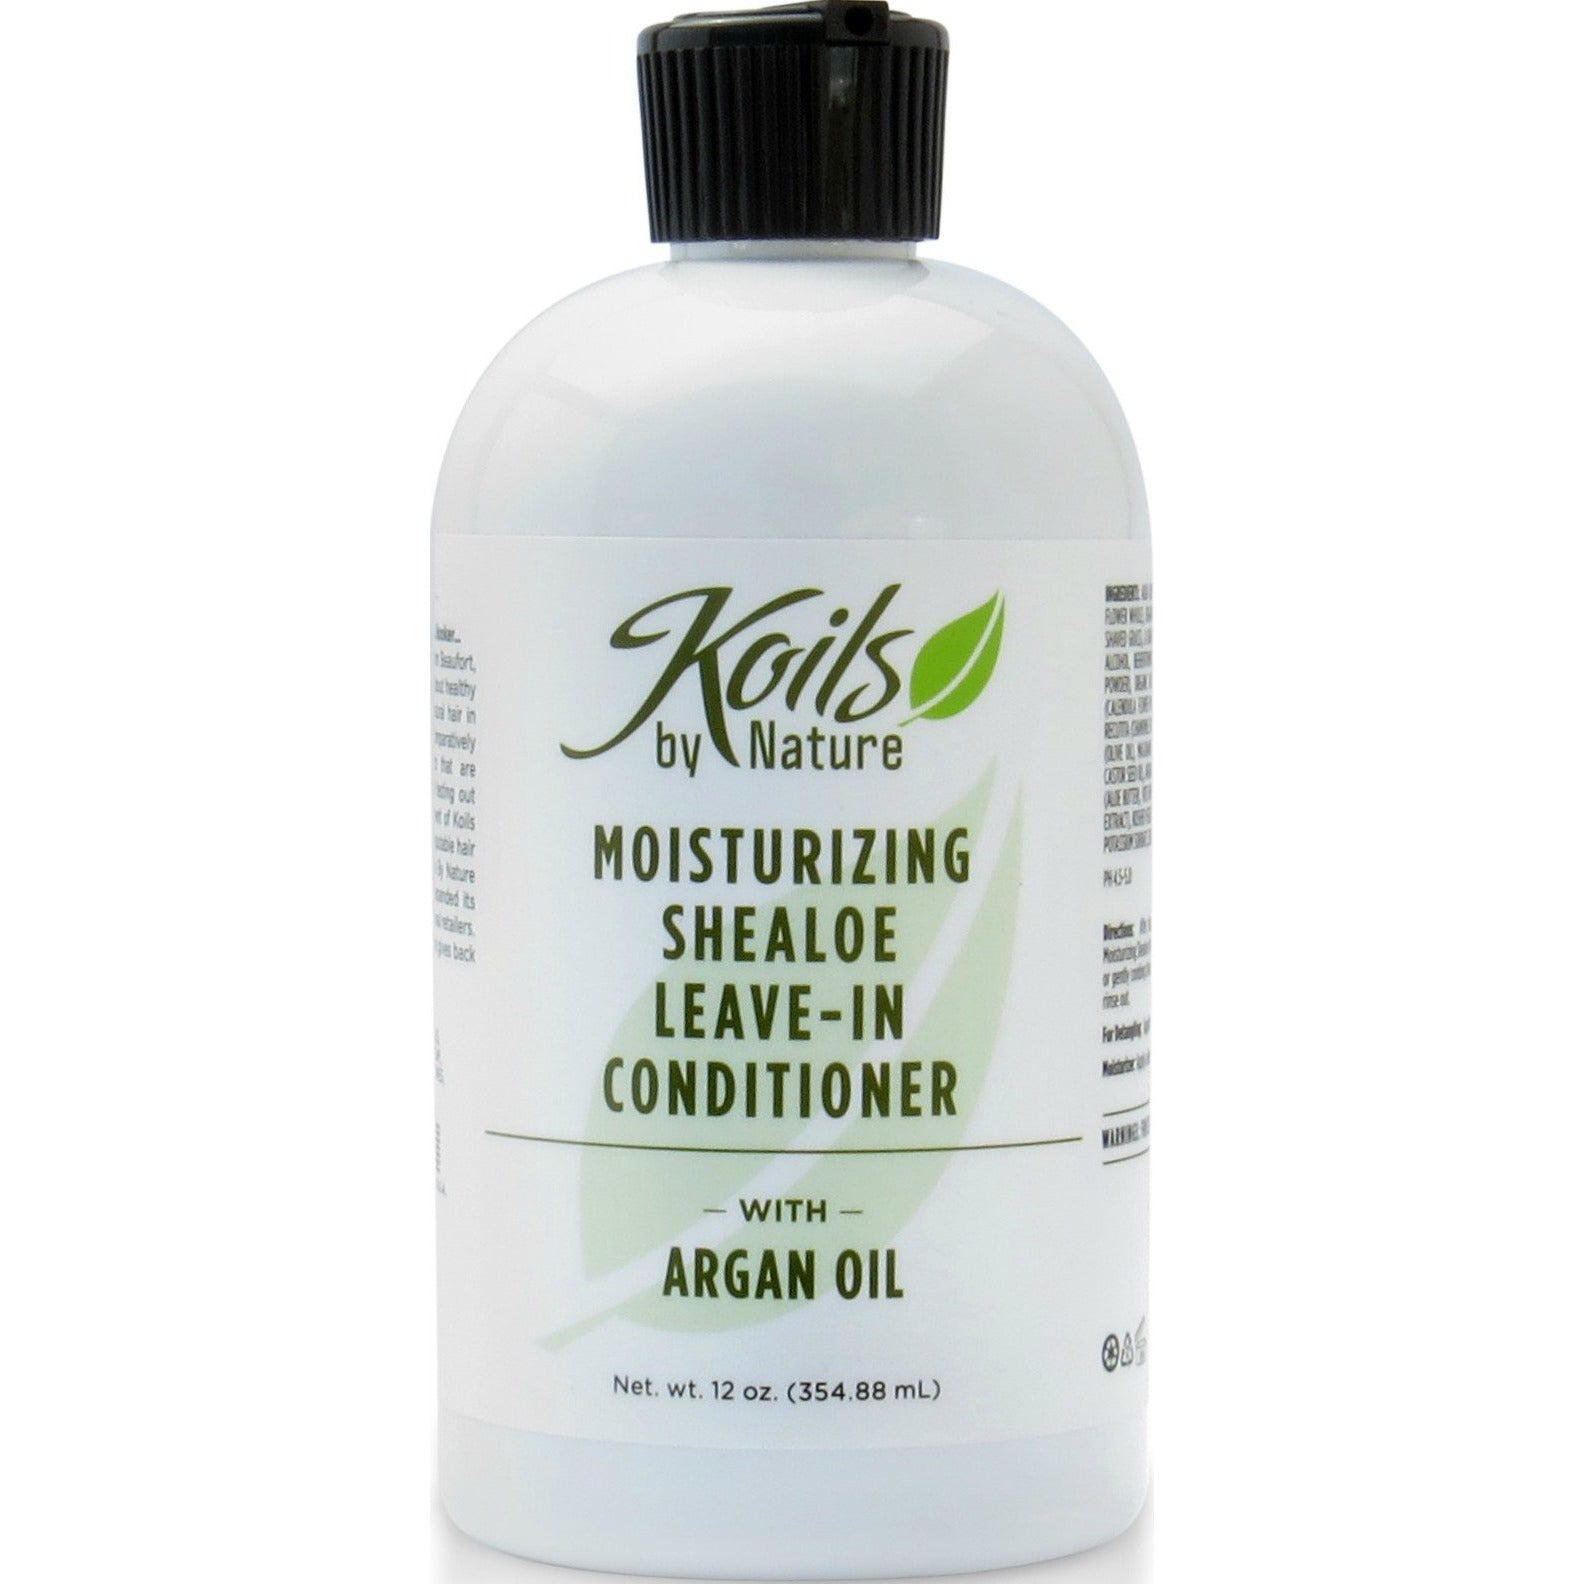 4th Ave Market: Koils by Nature Moisturizing Shea Aloe Leave-In Conditioner